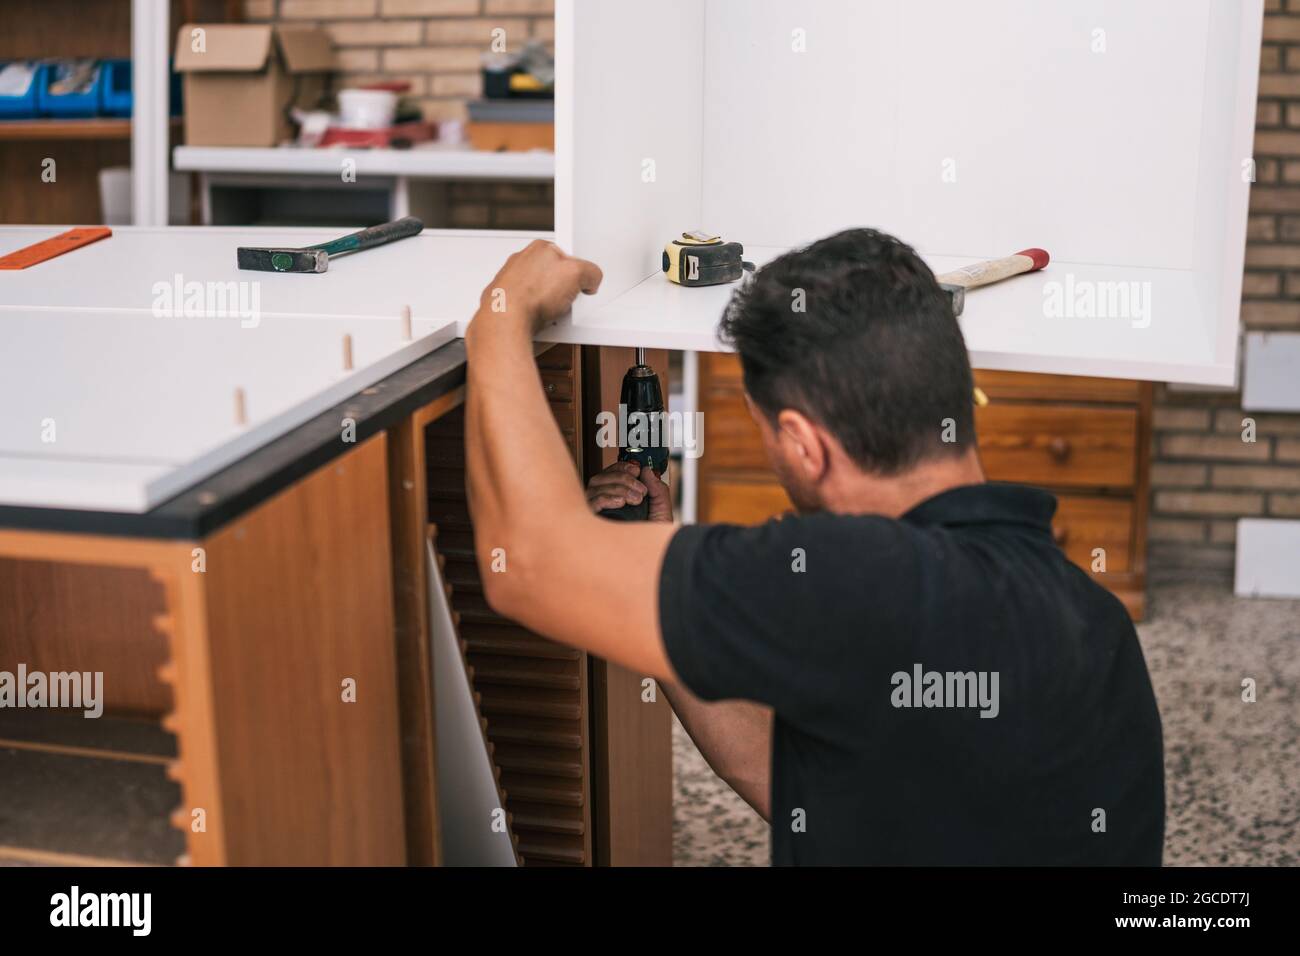 Worker using a drill to build a kitchen furniture Stock Photo